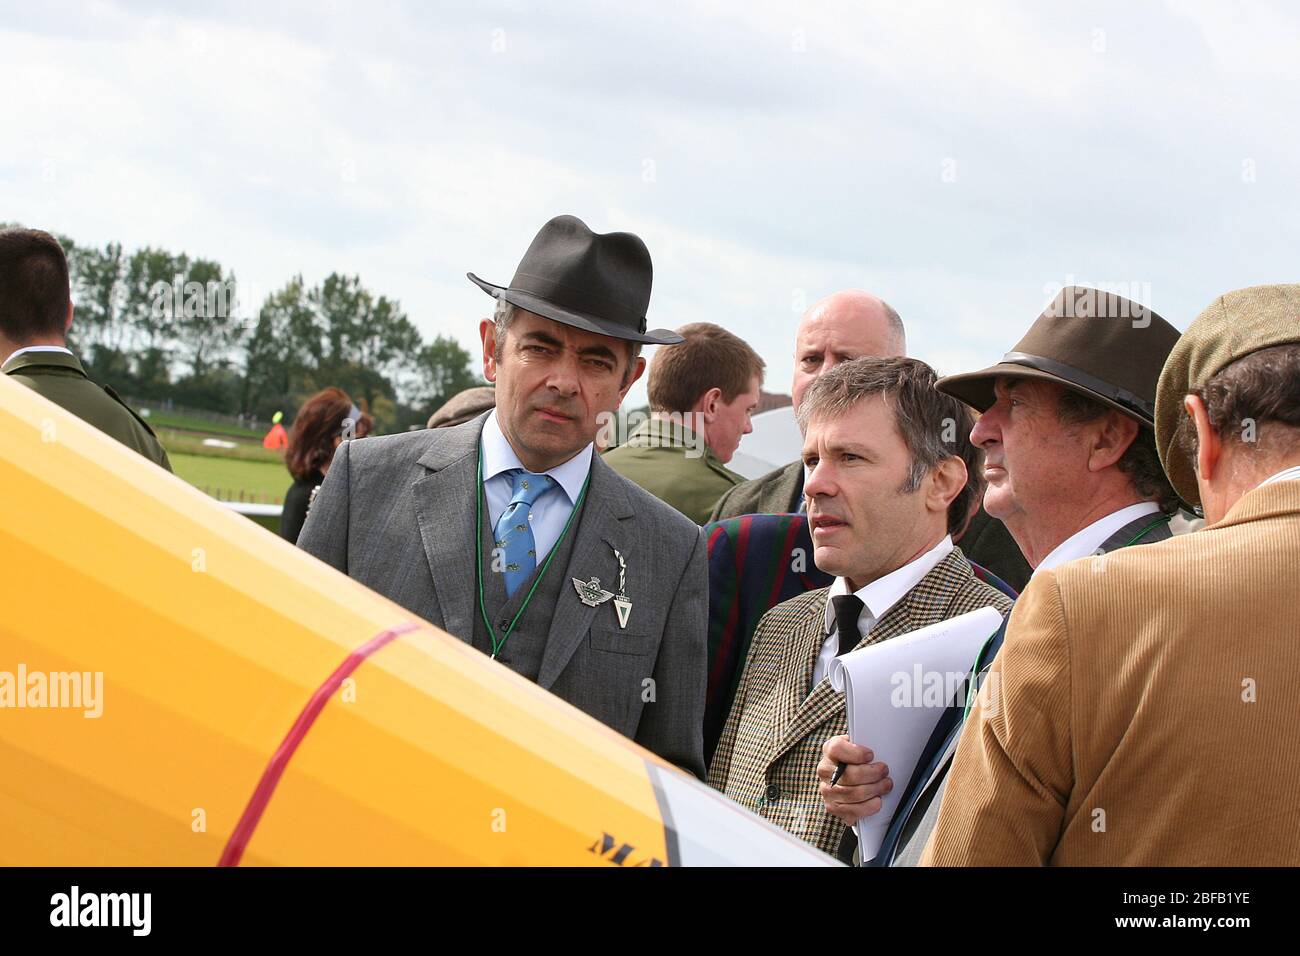 2010 GOODWOOD Revival - Aviation concours judged by Rowan Atkinson, Nick Mason and Bruce Dickinson Stock Photo